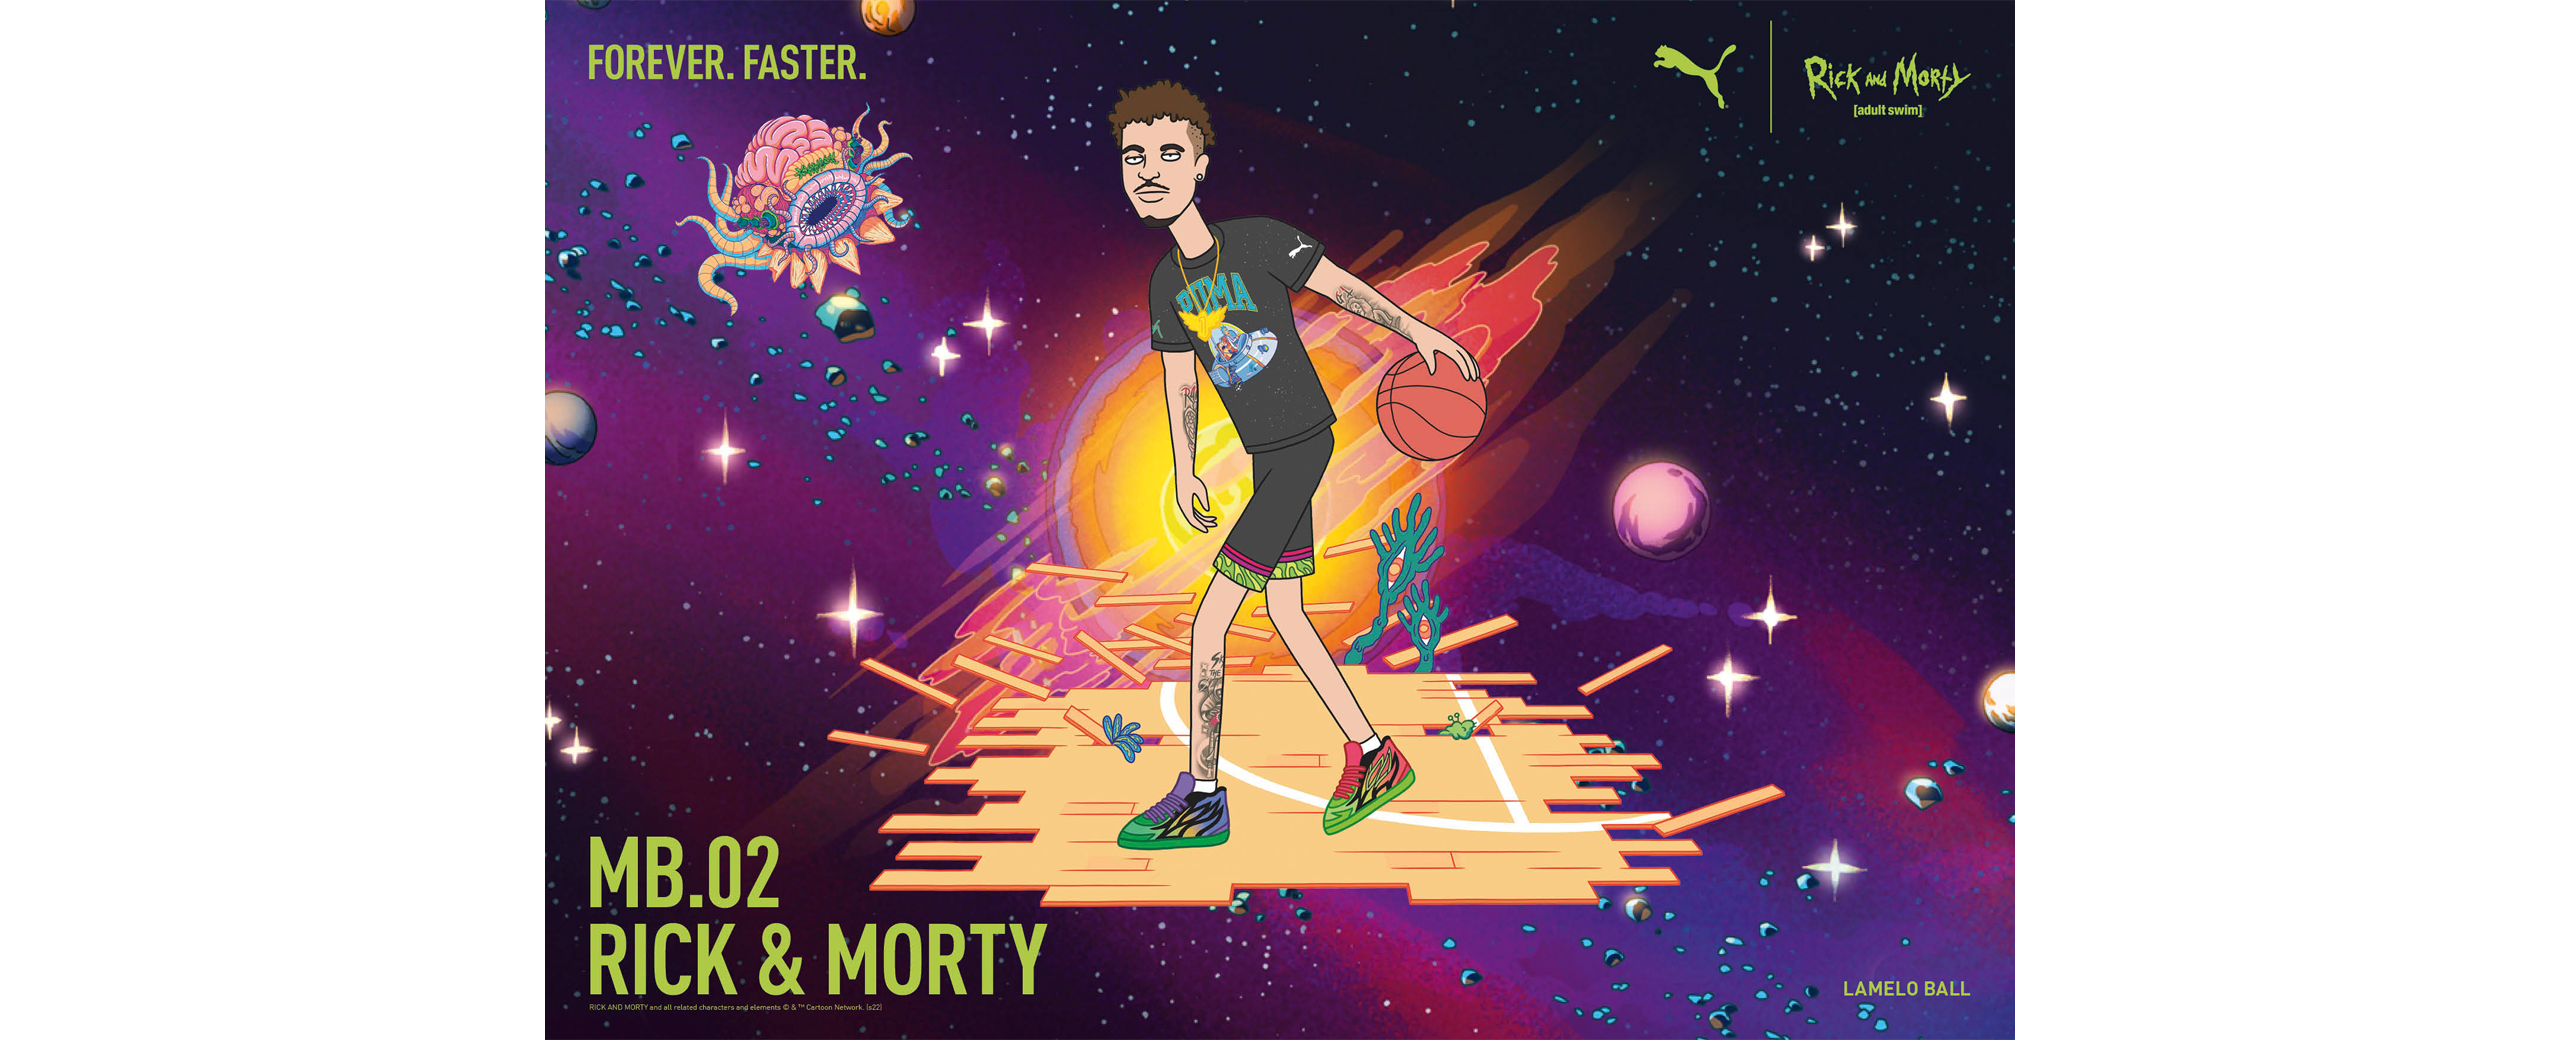 PUMA x RICK AND MORTY LaMelo Ball MB.02